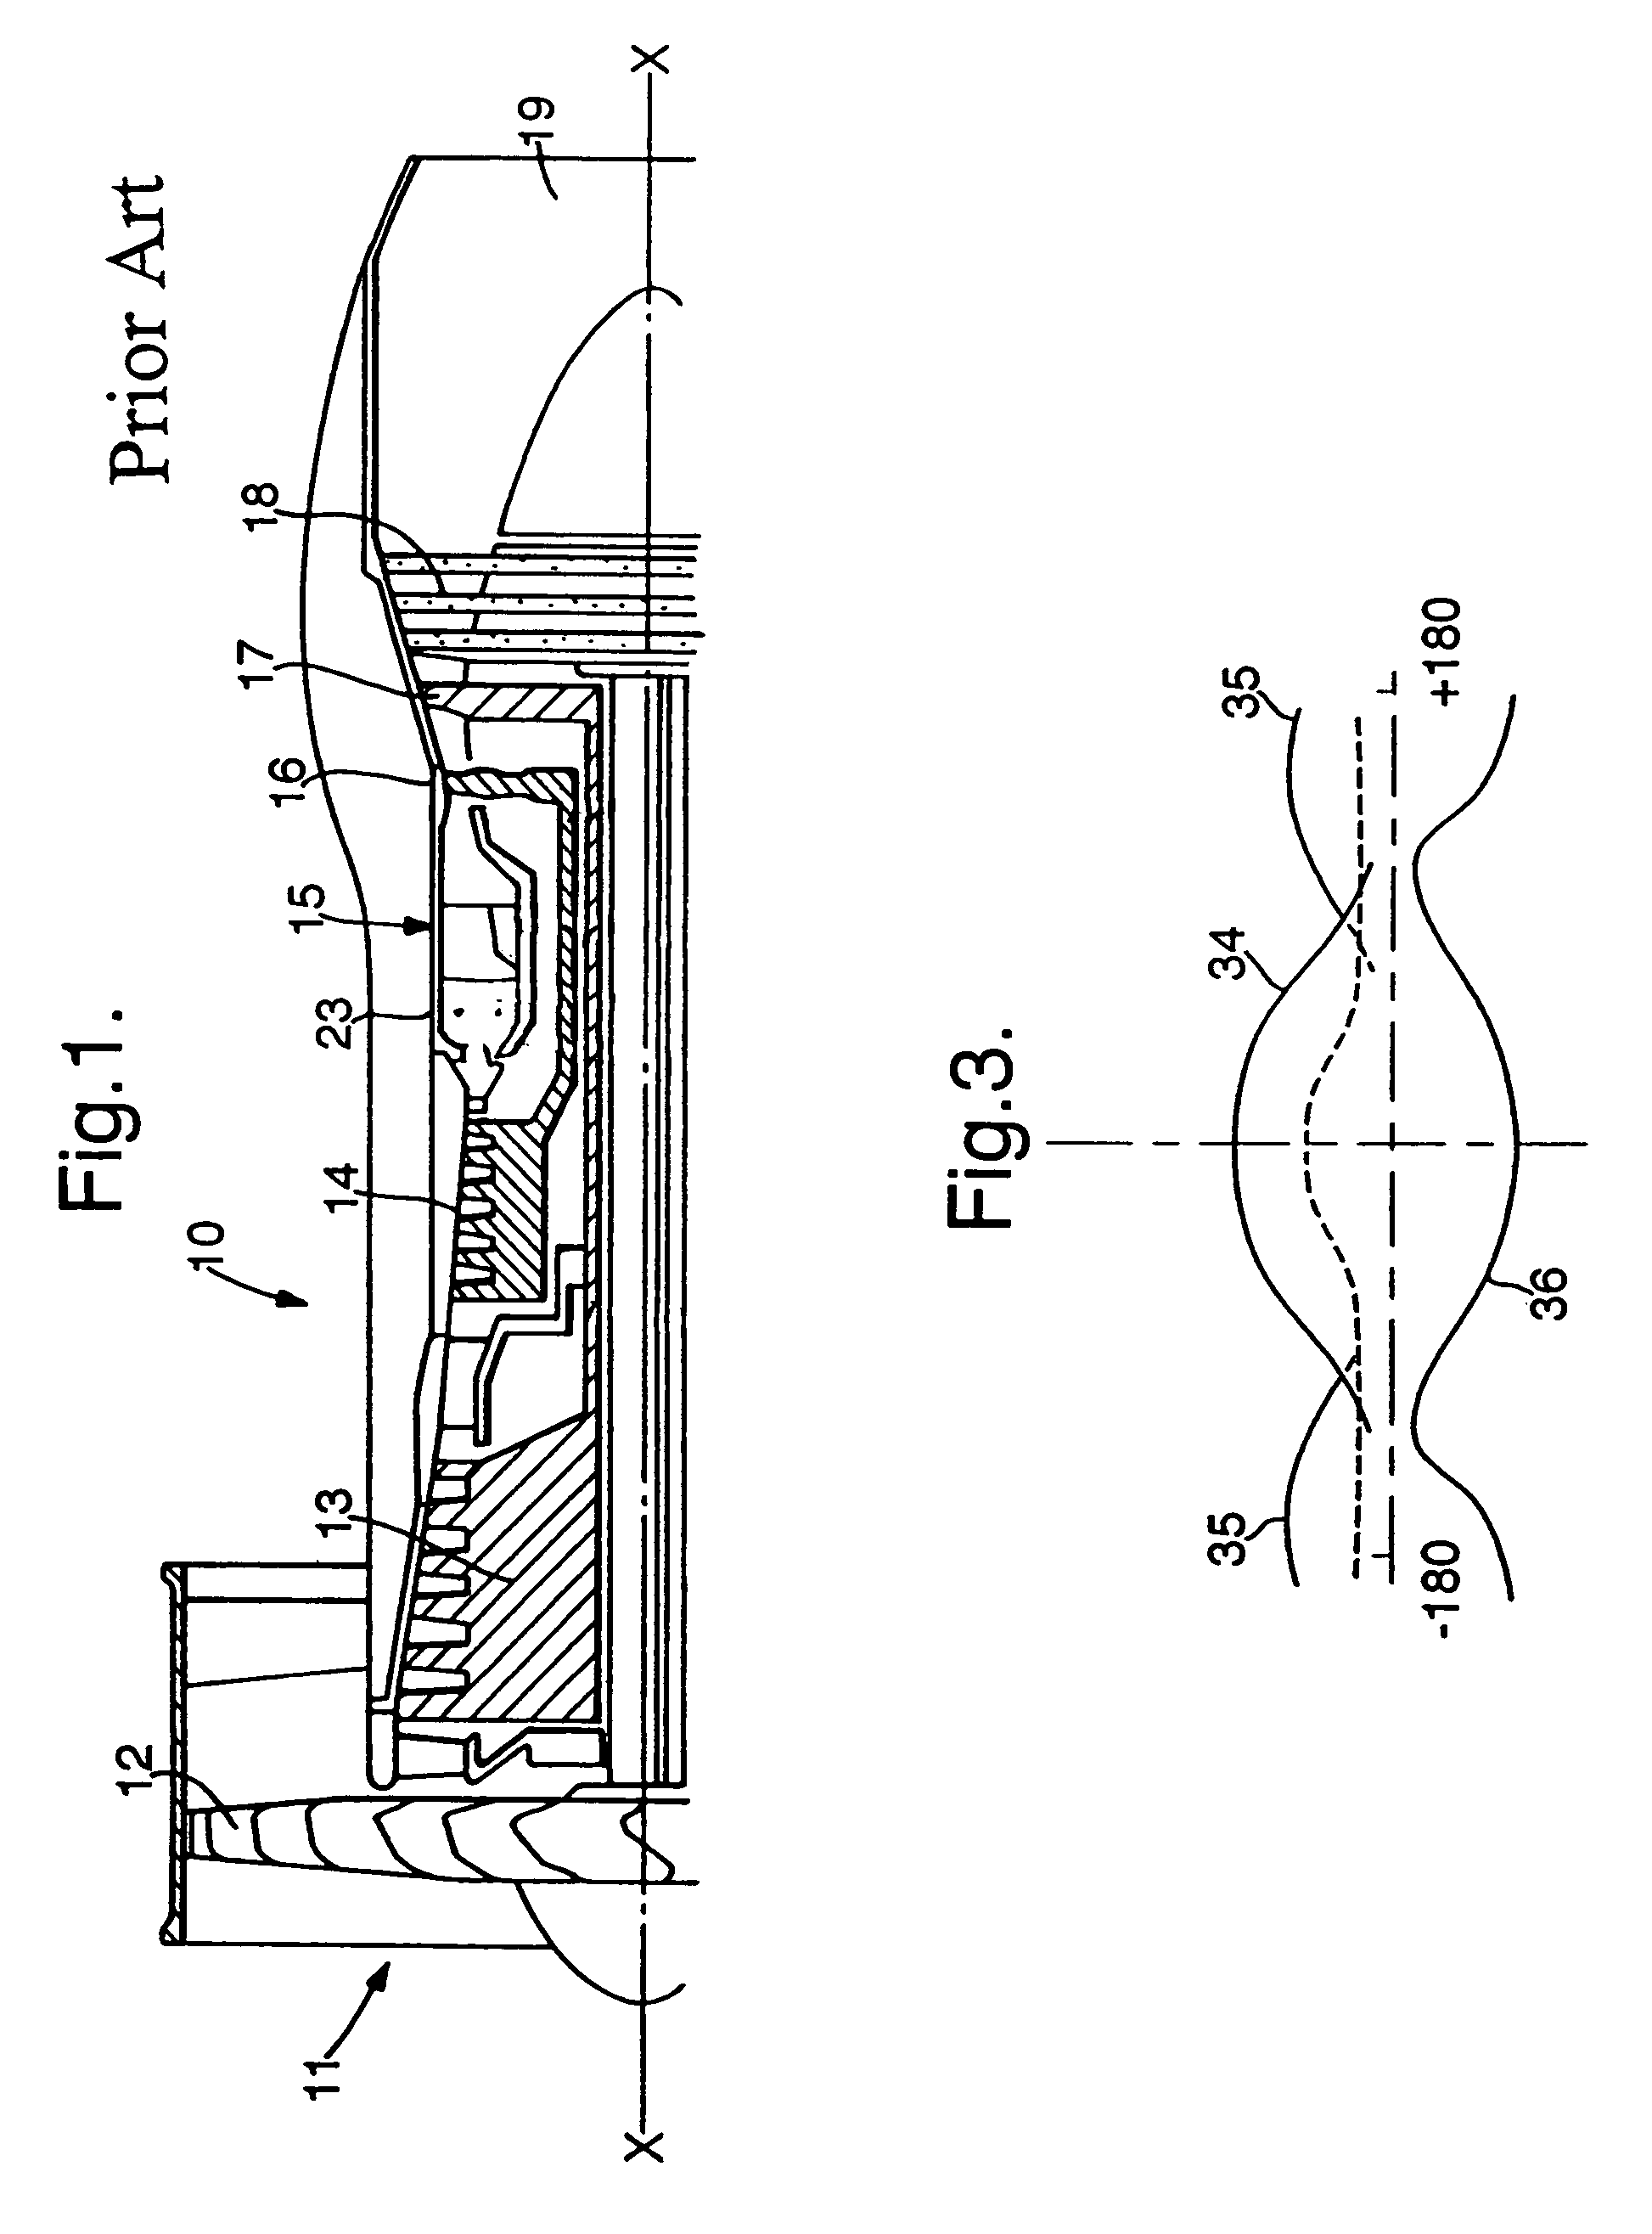 Gas turbine engine including stator vanes having variable camber and stagger configurations at different circumferential positions